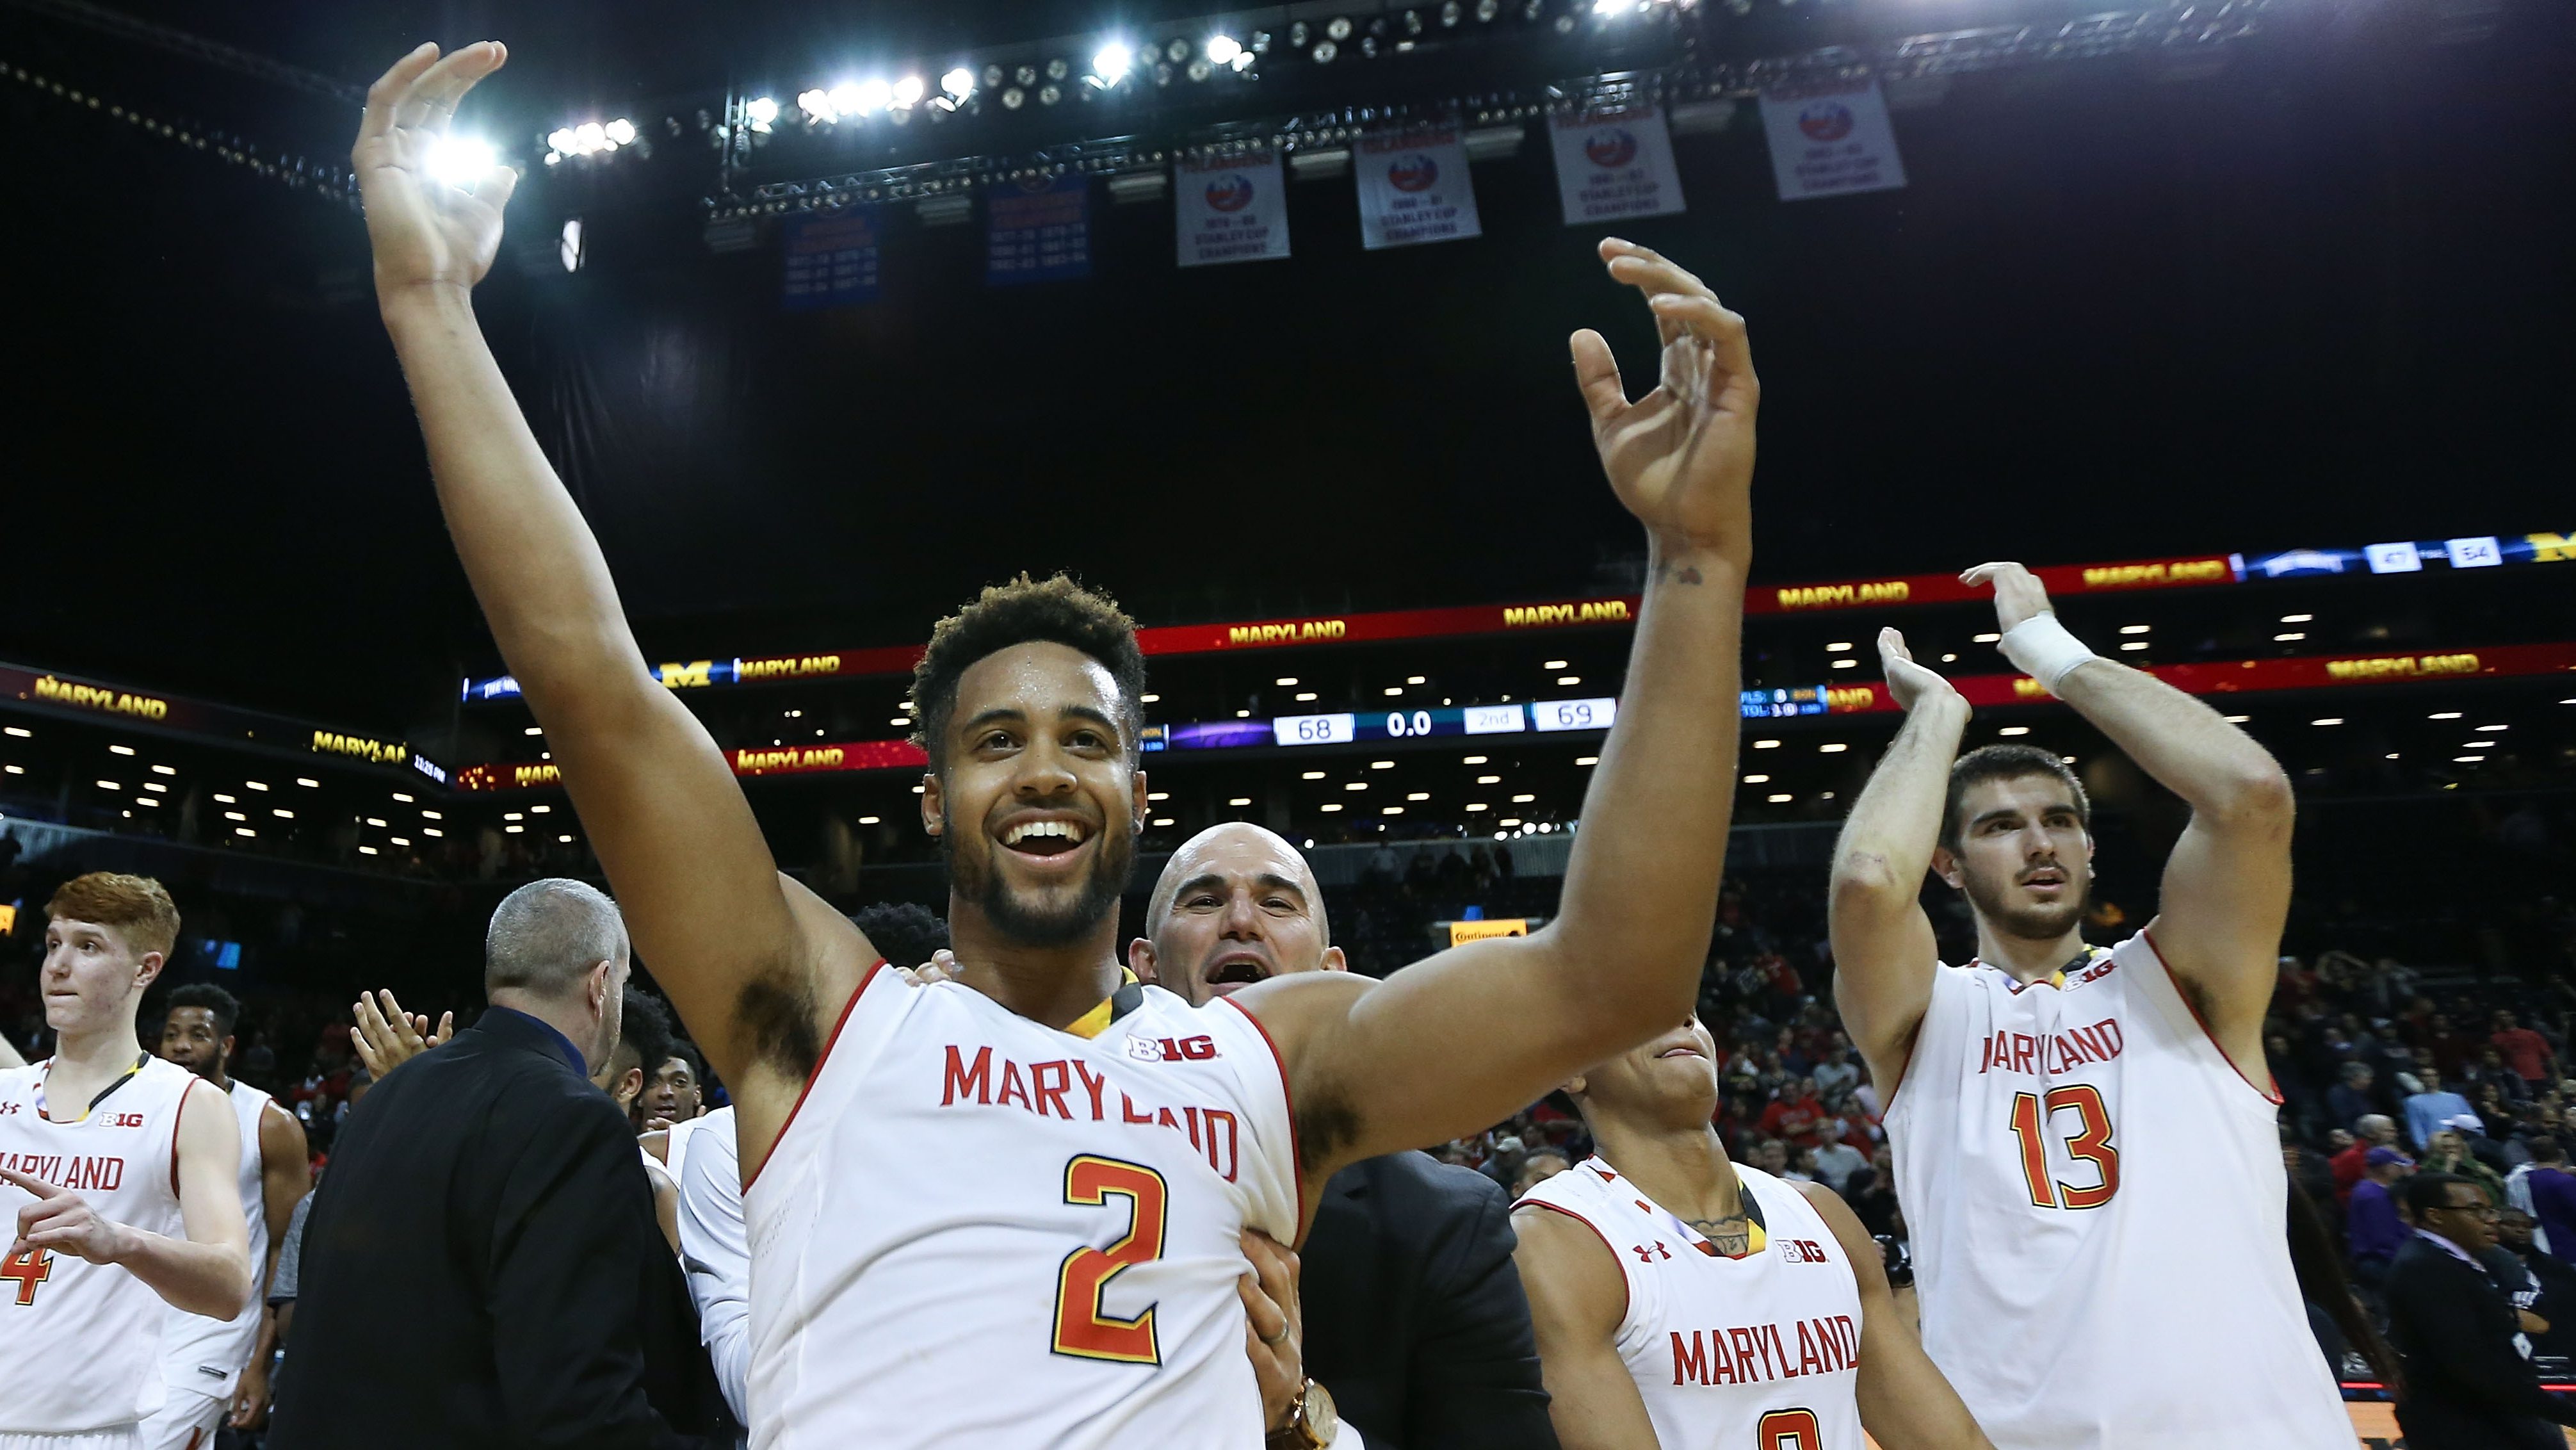 NEW YORK, NY - NOVEMBER 26:  Melo Trimble #2 of the Maryland Terrapins celebrates after hitting the game winning shot as they defeated the Kansas State Wildcats 69-68 during the championship game of the Barclays Center Classic at Barclays Center on November 26, 2016 in the Brooklyn borough of New York City.  (Photo by Michael Reaves/Getty Images)